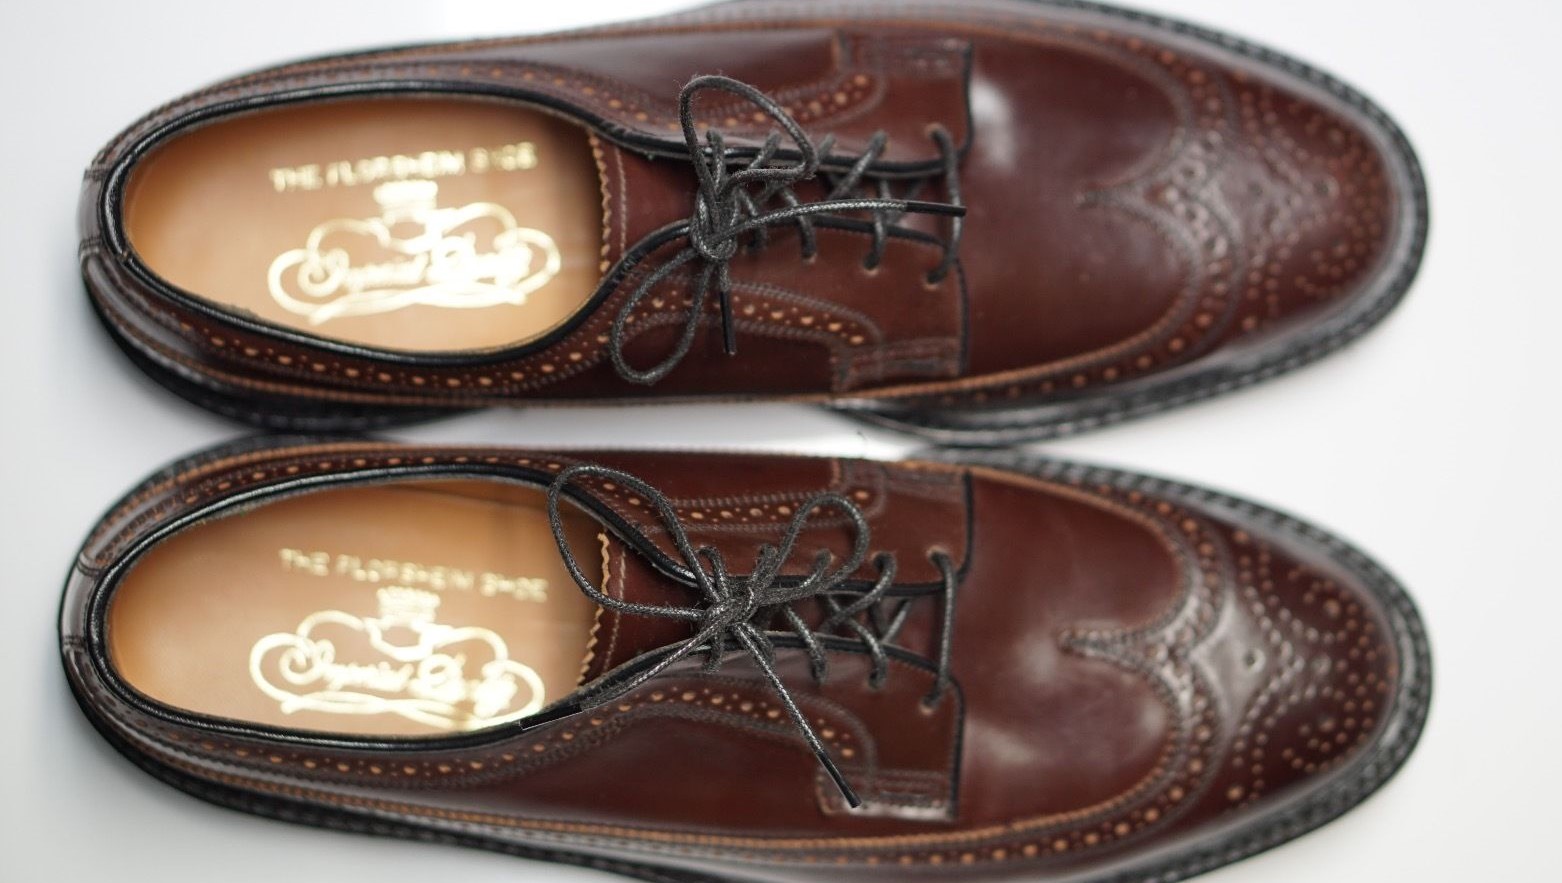 Florsheim Imperial 93605 eBay Guide | vcleat